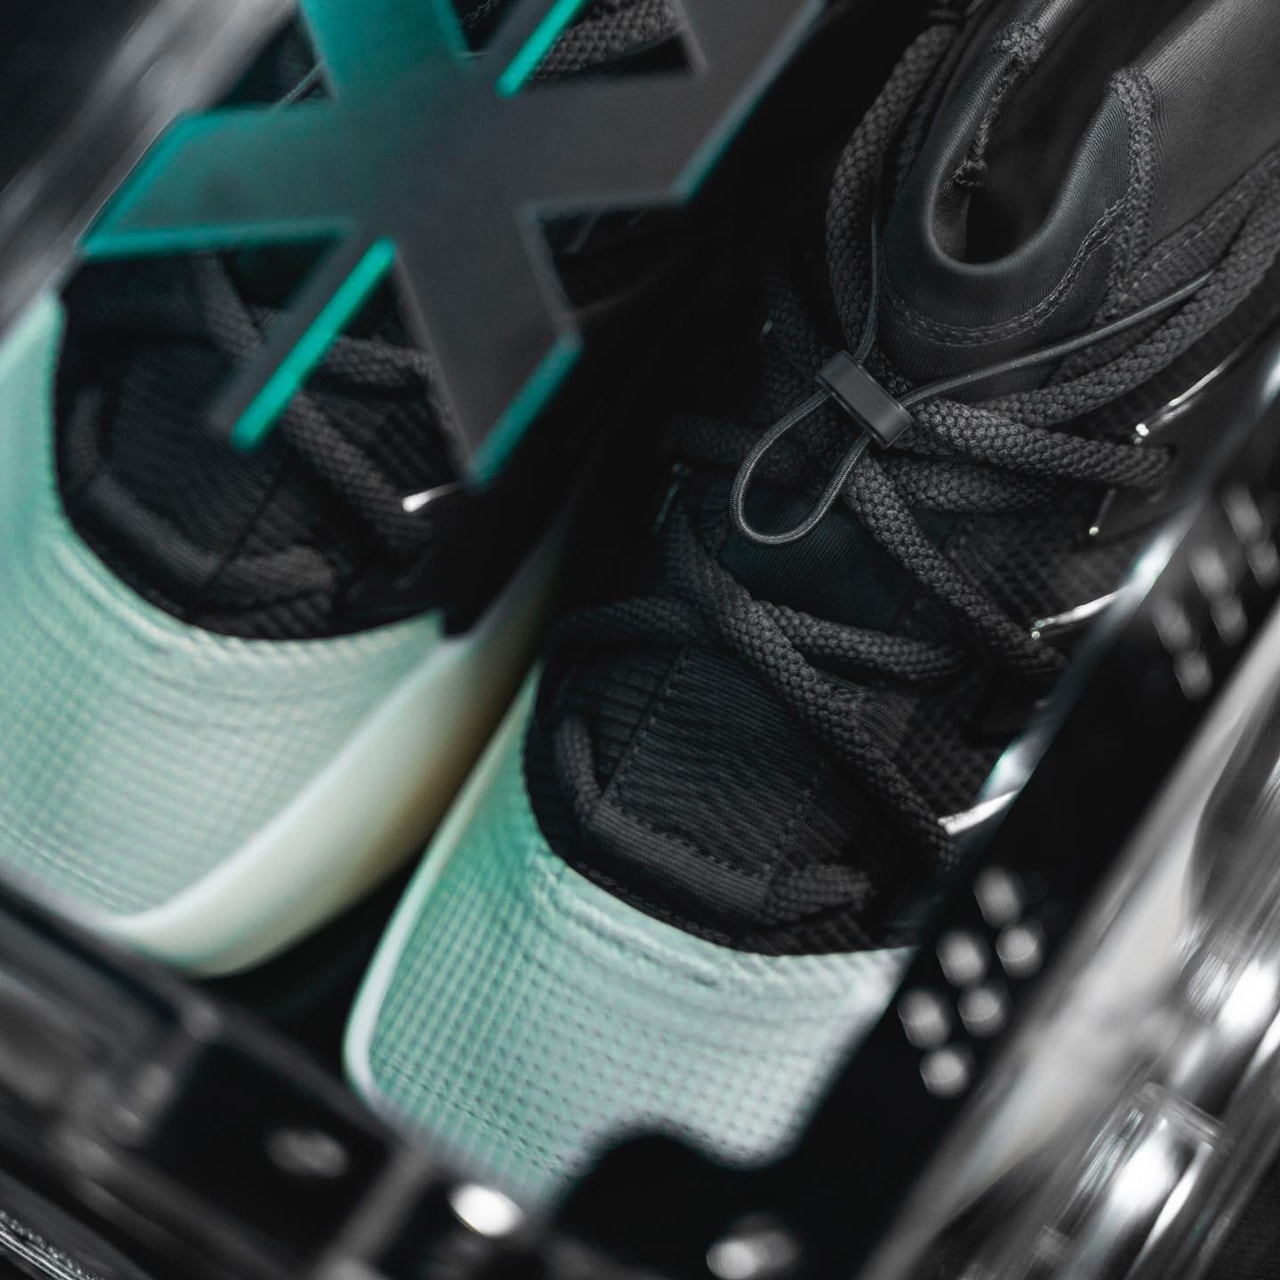 All the details on the latest FoG and adidas collaboration - HIGHXTAR.